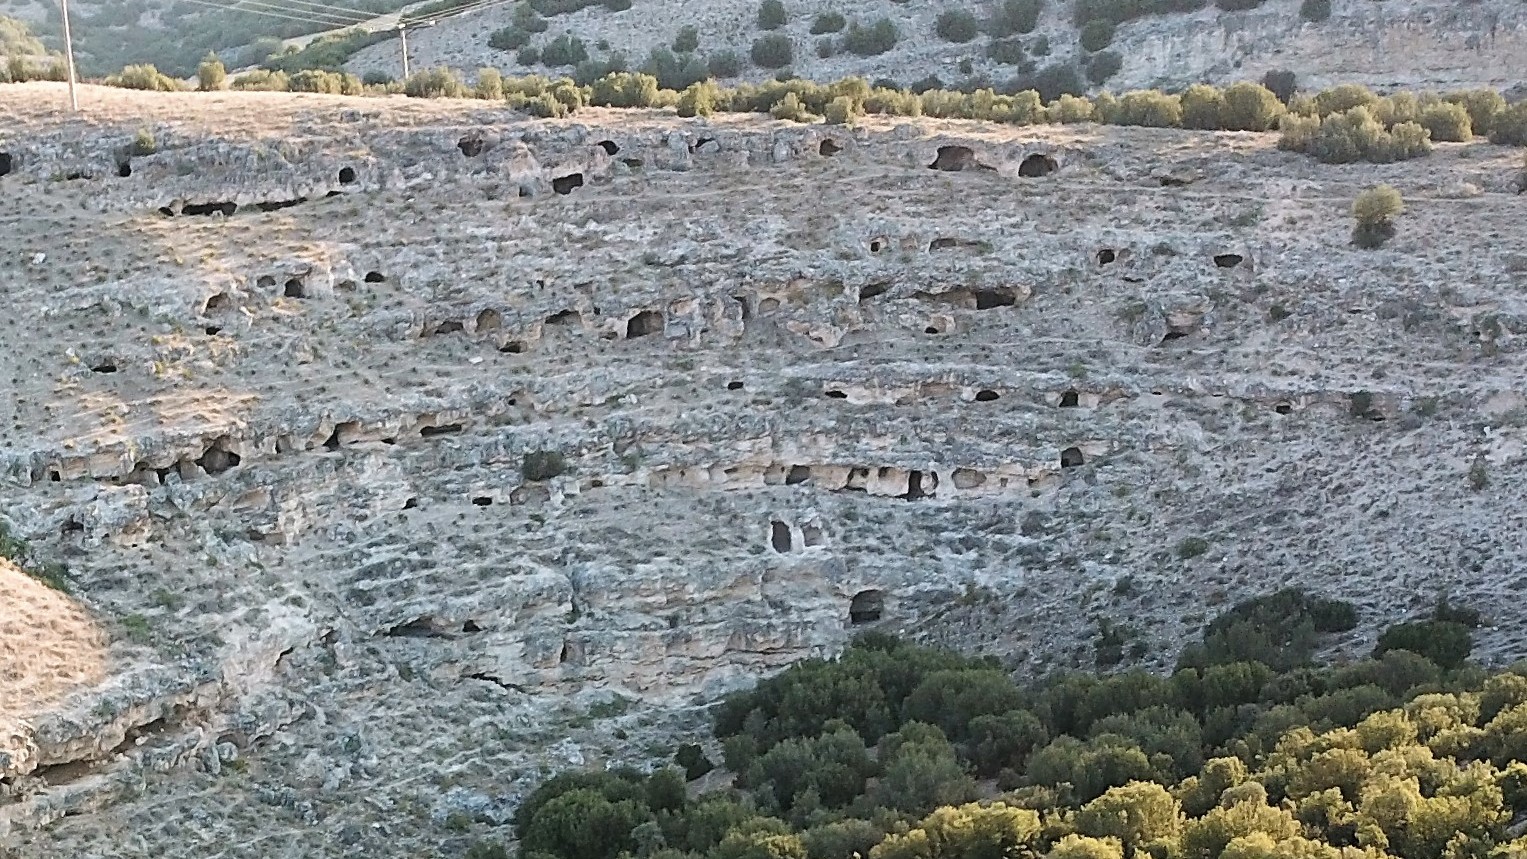 A view of the northeastern necropolis in the canyon wall.